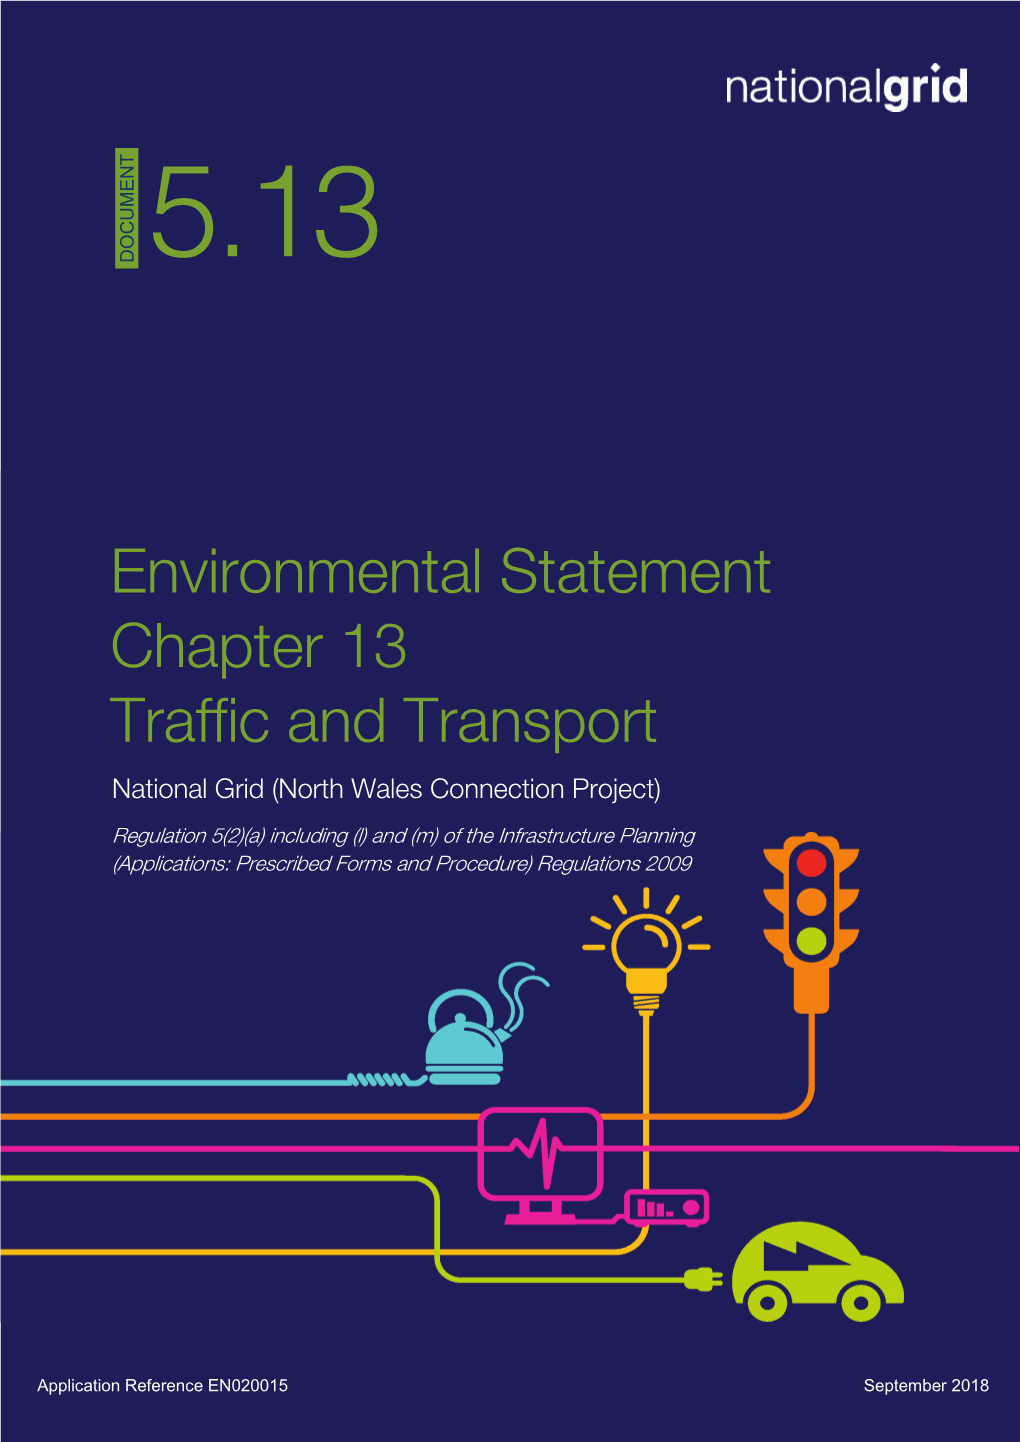 Environmental Statement Chapter 13 Traffic and Transport Document 5.13 I